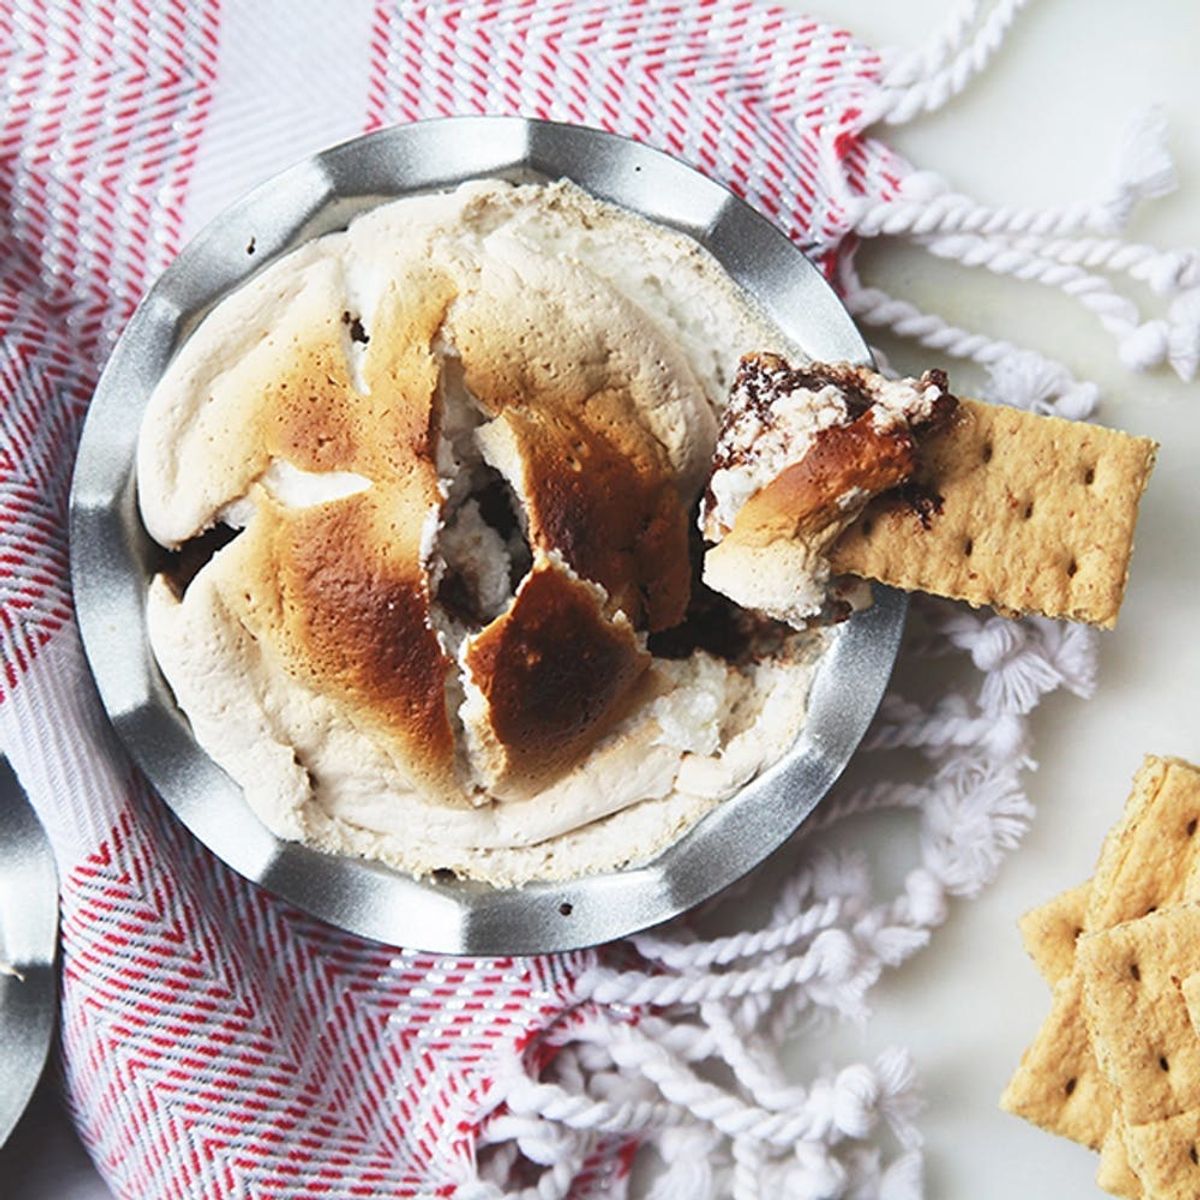 You Can Make This Decadent Indoor S’mores Dip Without the Campfire